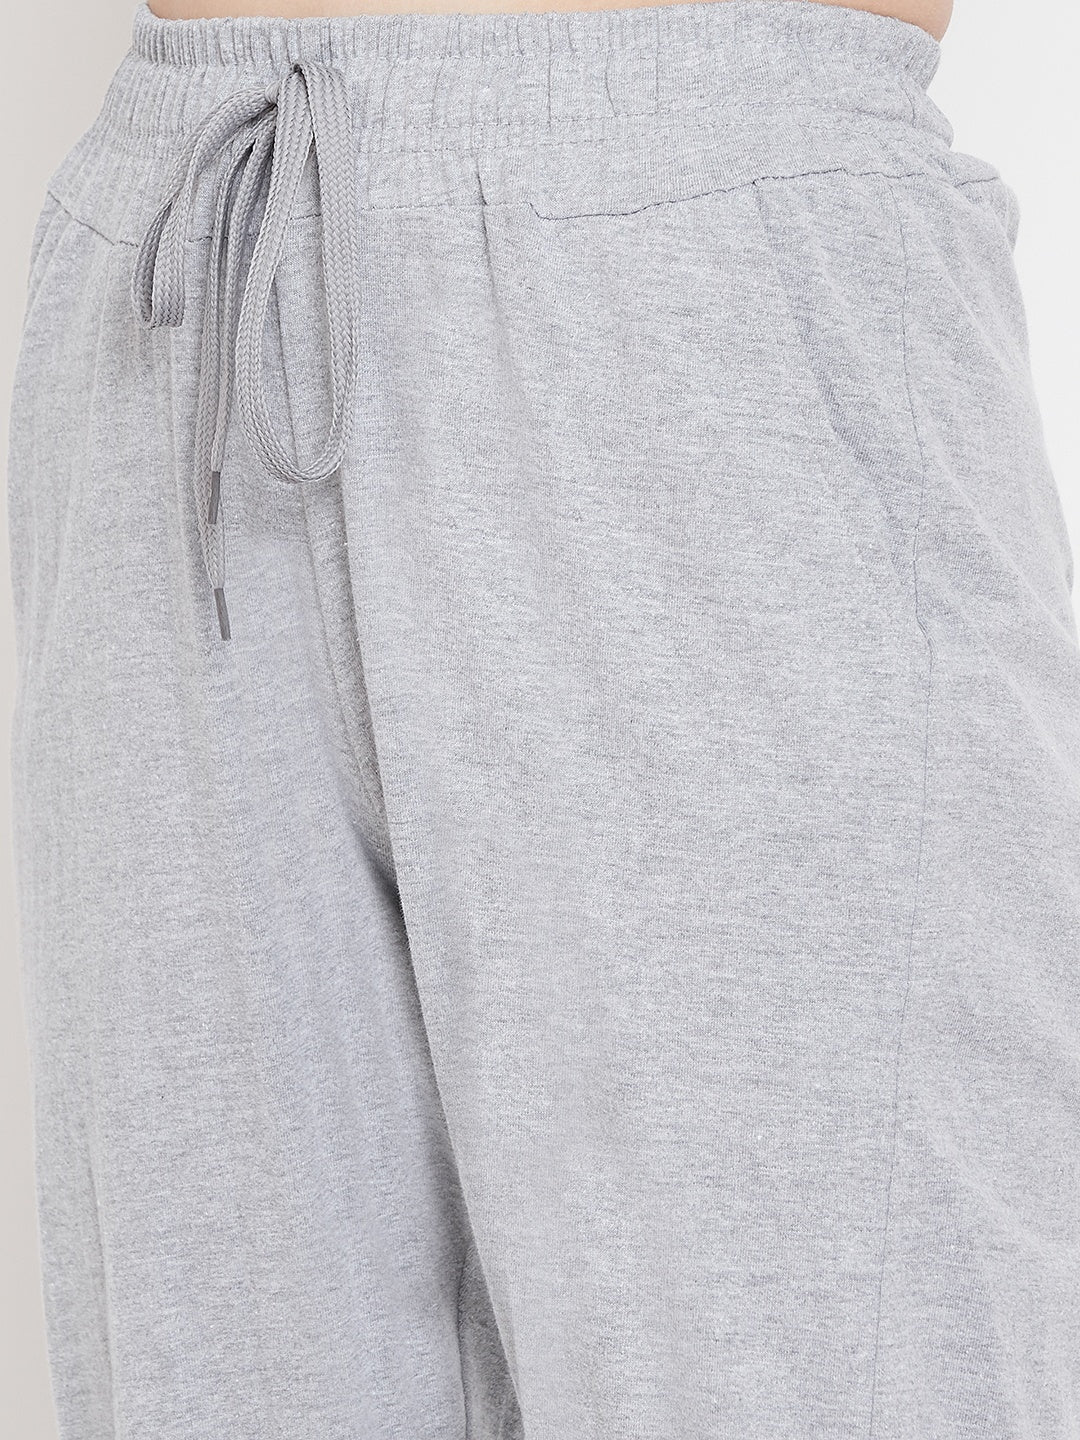 Women's Pack of 2 Track Pants-Light Grey and Maroon